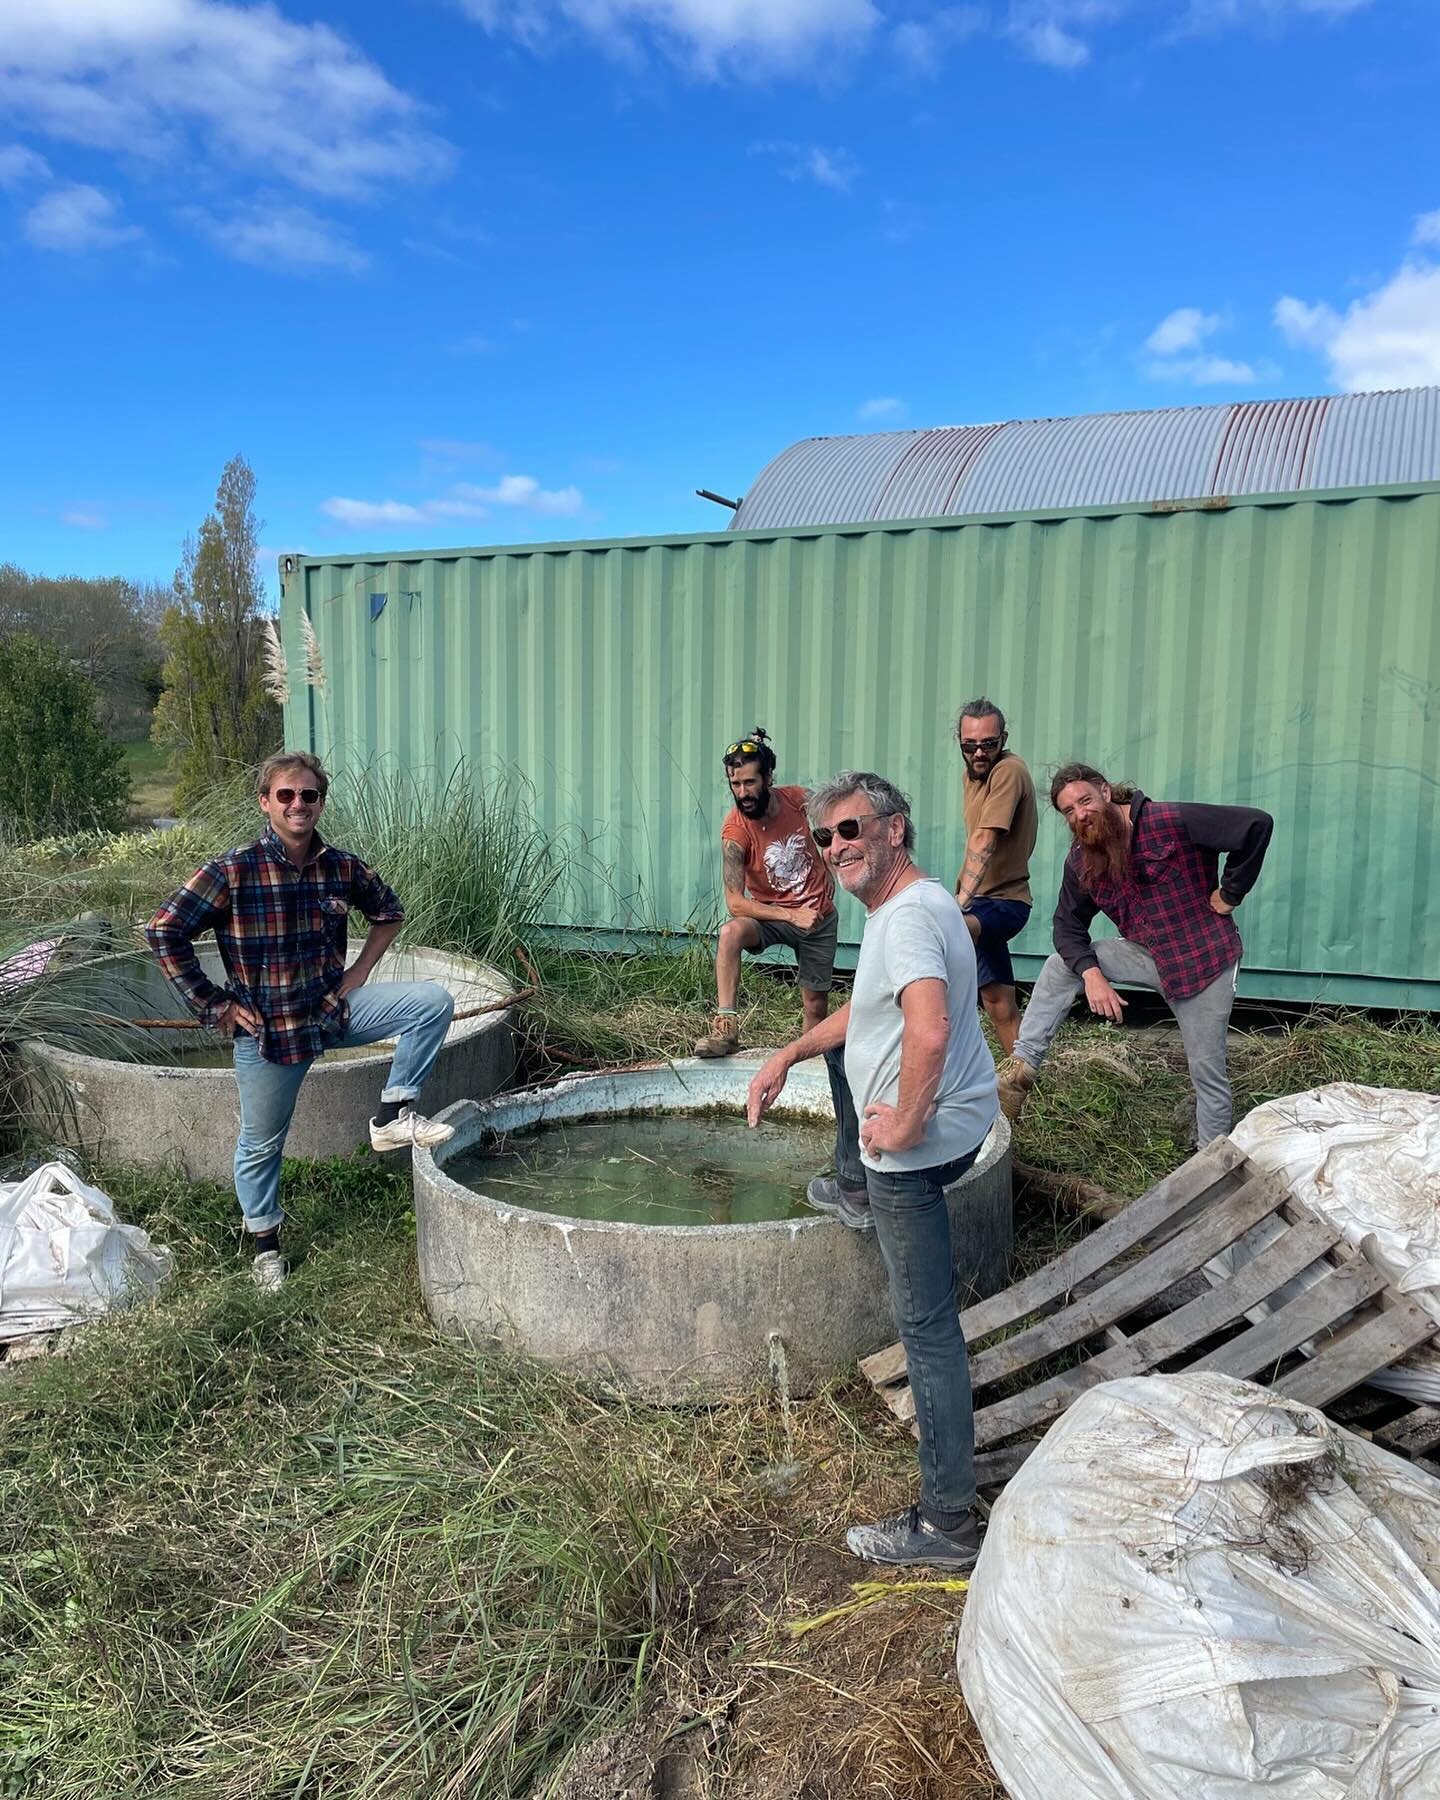 Some of the Ariki crew on our recent working bee, community brings people together to create a vision beyond the individual. 💚